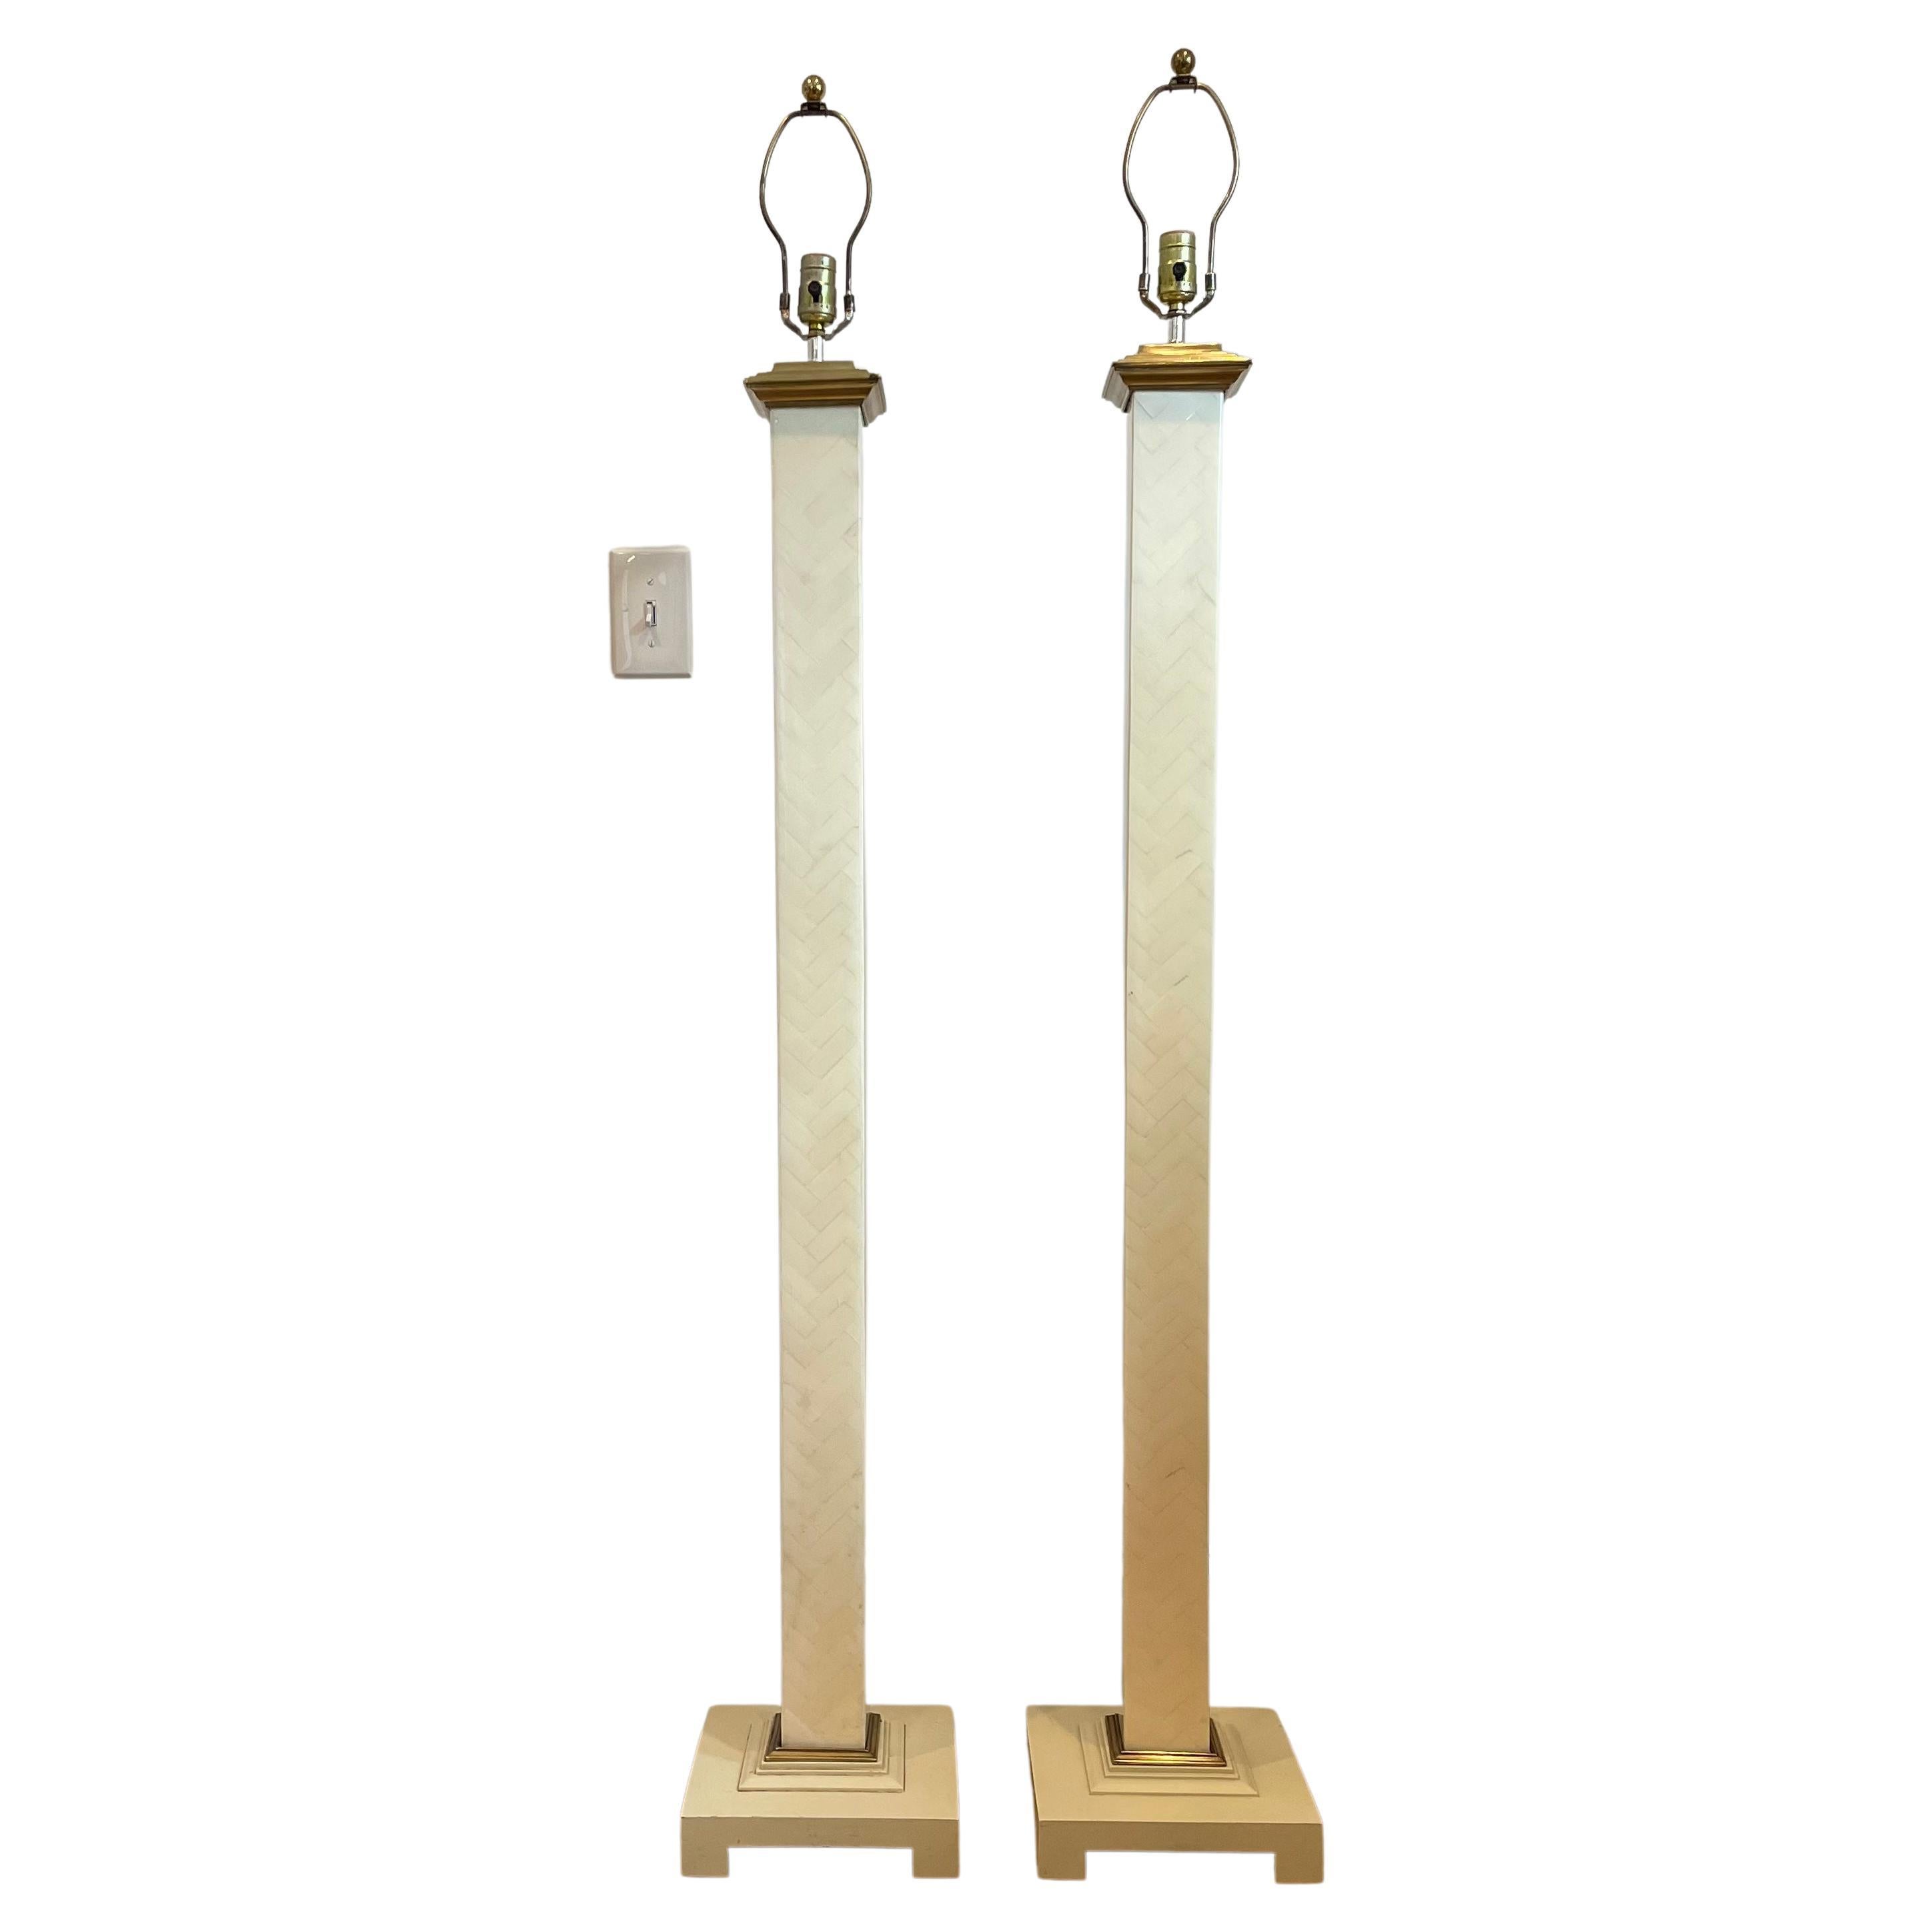 Herringbone pattern Tessellated floor lamps with brass accents in the manner of Enrique Garcel.
Lamp to socket is 54.5”.